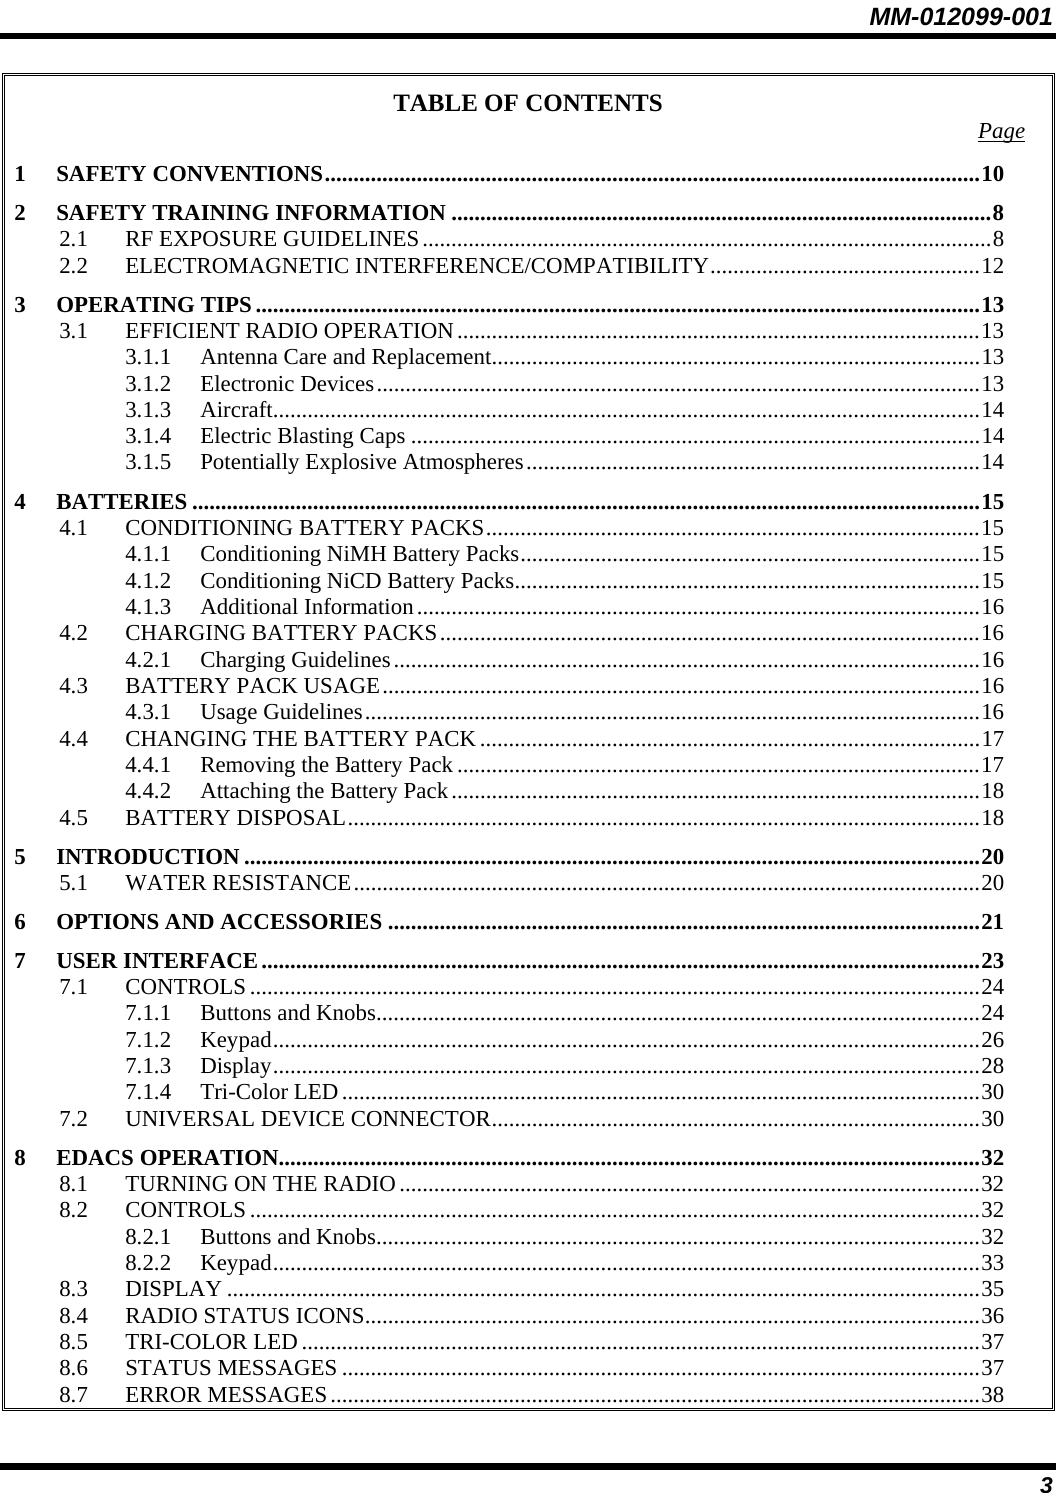 MM-012099-001 3 TABLE OF CONTENTS  Page 1 SAFETY CONVENTIONS..................................................................................................................10 2 SAFETY TRAINING INFORMATION ..............................................................................................8 2.1 RF EXPOSURE GUIDELINES...................................................................................................8 2.2 ELECTROMAGNETIC INTERFERENCE/COMPATIBILITY...............................................12 3 OPERATING TIPS ..............................................................................................................................13 3.1 EFFICIENT RADIO OPERATION...........................................................................................13 3.1.1 Antenna Care and Replacement.....................................................................................13 3.1.2 Electronic Devices.........................................................................................................13 3.1.3 Aircraft...........................................................................................................................14 3.1.4 Electric Blasting Caps ...................................................................................................14 3.1.5 Potentially Explosive Atmospheres...............................................................................14 4 BATTERIES .........................................................................................................................................15 4.1 CONDITIONING BATTERY PACKS......................................................................................15 4.1.1 Conditioning NiMH Battery Packs................................................................................15 4.1.2 Conditioning NiCD Battery Packs.................................................................................15 4.1.3 Additional Information..................................................................................................16 4.2 CHARGING BATTERY PACKS..............................................................................................16 4.2.1 Charging Guidelines......................................................................................................16 4.3 BATTERY PACK USAGE........................................................................................................16 4.3.1 Usage Guidelines...........................................................................................................16 4.4 CHANGING THE BATTERY PACK .......................................................................................17 4.4.1 Removing the Battery Pack ...........................................................................................17 4.4.2 Attaching the Battery Pack............................................................................................18 4.5 BATTERY DISPOSAL..............................................................................................................18 5 INTRODUCTION ................................................................................................................................20 5.1 WATER RESISTANCE.............................................................................................................20 6 OPTIONS AND ACCESSORIES .......................................................................................................21 7 USER INTERFACE.............................................................................................................................23 7.1 CONTROLS...............................................................................................................................24 7.1.1 Buttons and Knobs.........................................................................................................24 7.1.2 Keypad...........................................................................................................................26 7.1.3 Display...........................................................................................................................28 7.1.4 Tri-Color LED...............................................................................................................30 7.2 UNIVERSAL DEVICE CONNECTOR.....................................................................................30 8 EDACS OPERATION..........................................................................................................................32 8.1 TURNING ON THE RADIO.....................................................................................................32 8.2 CONTROLS...............................................................................................................................32 8.2.1 Buttons and Knobs.........................................................................................................32 8.2.2 Keypad...........................................................................................................................33 8.3 DISPLAY ...................................................................................................................................35 8.4 RADIO STATUS ICONS...........................................................................................................36 8.5 TRI-COLOR LED......................................................................................................................37 8.6 STATUS MESSAGES ...............................................................................................................37 8.7 ERROR MESSAGES.................................................................................................................38 